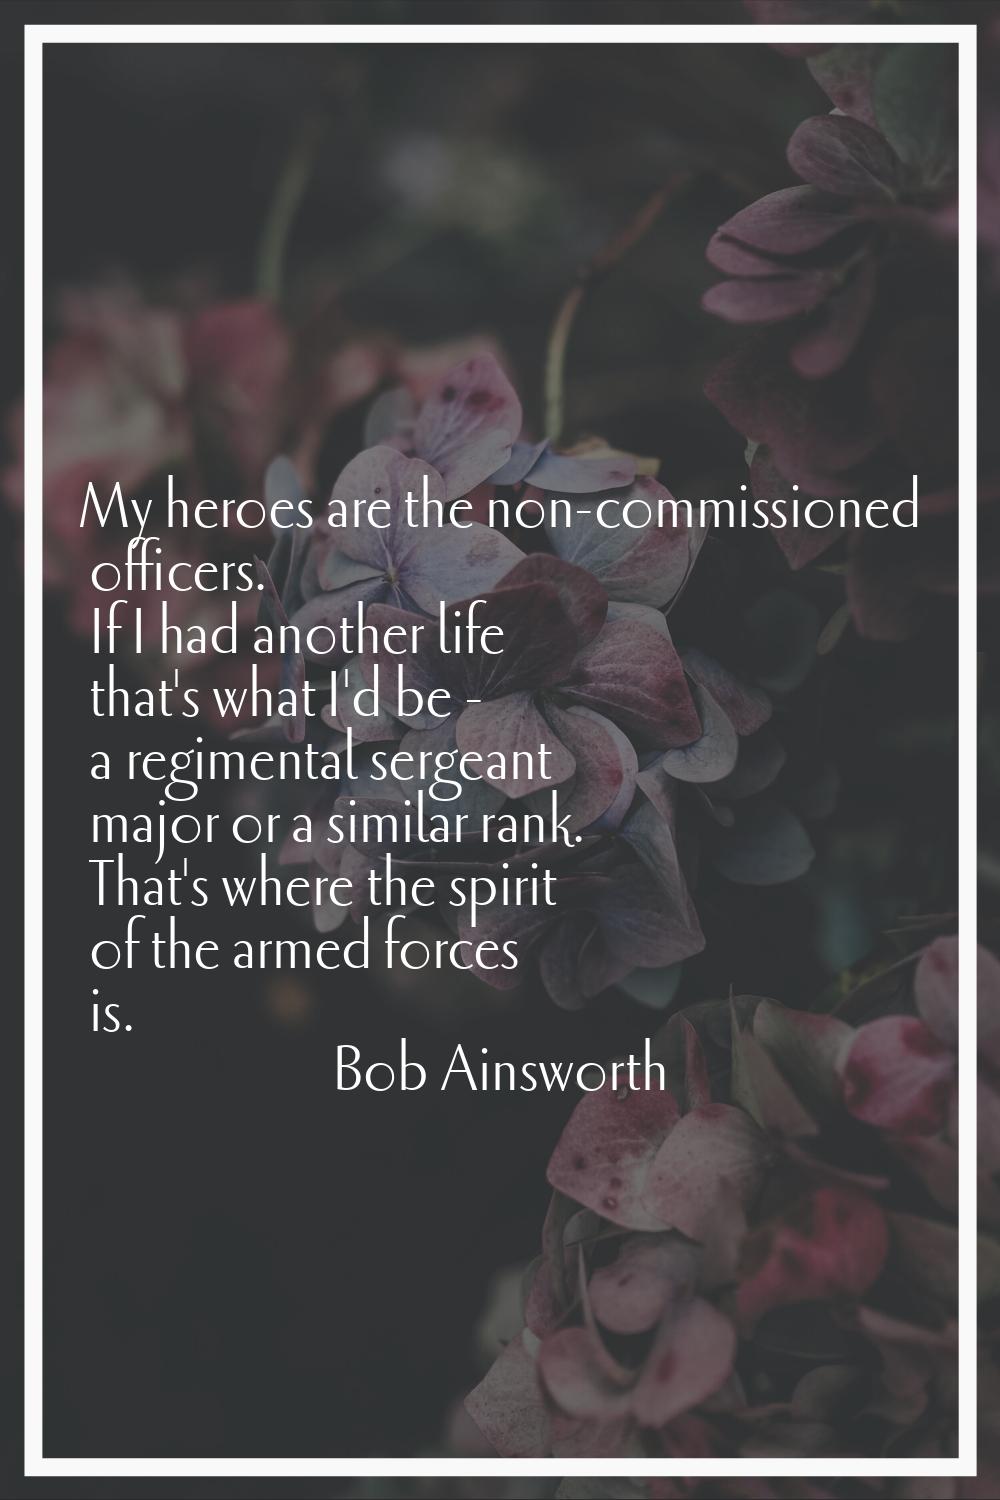 My heroes are the non-commissioned officers. If I had another life that's what I'd be - a regimenta